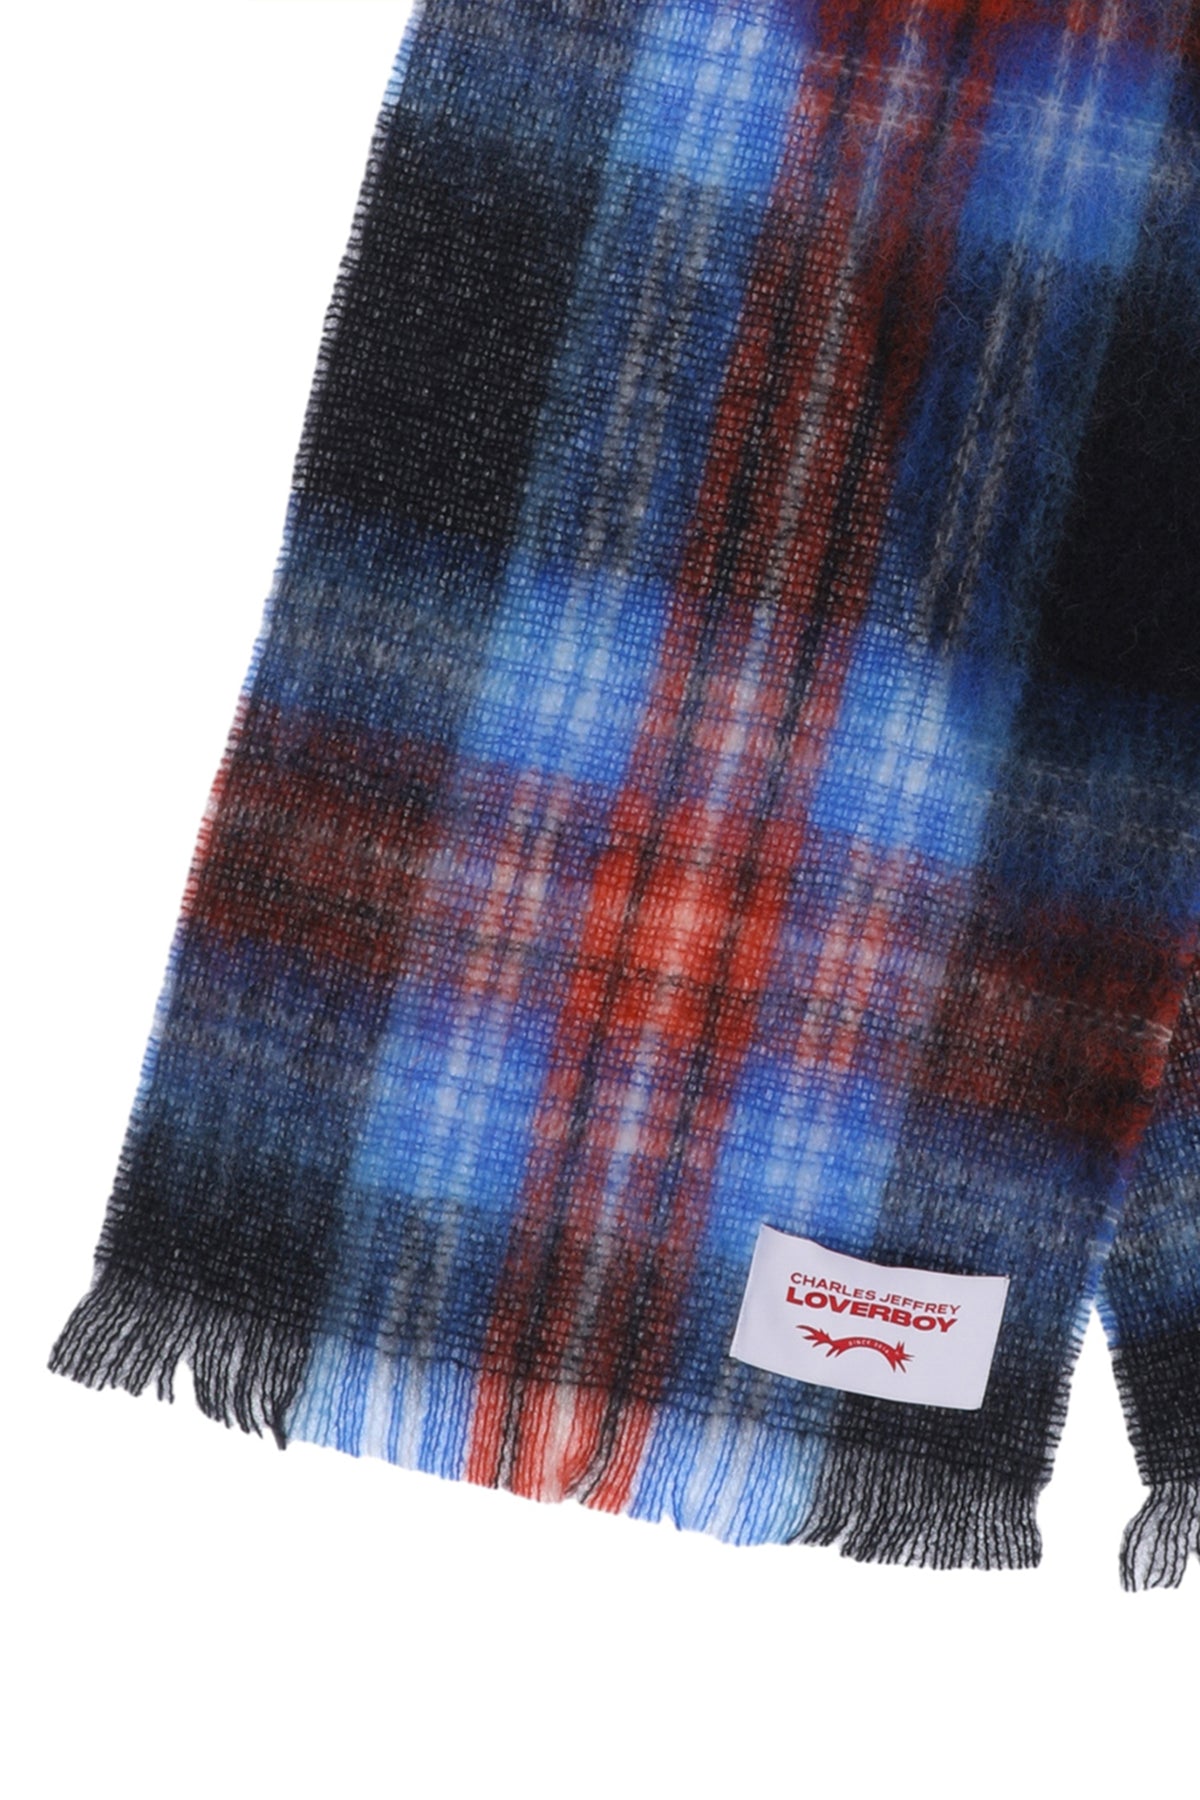 MOHAIR SCARF / BLK BLU RED CHECK